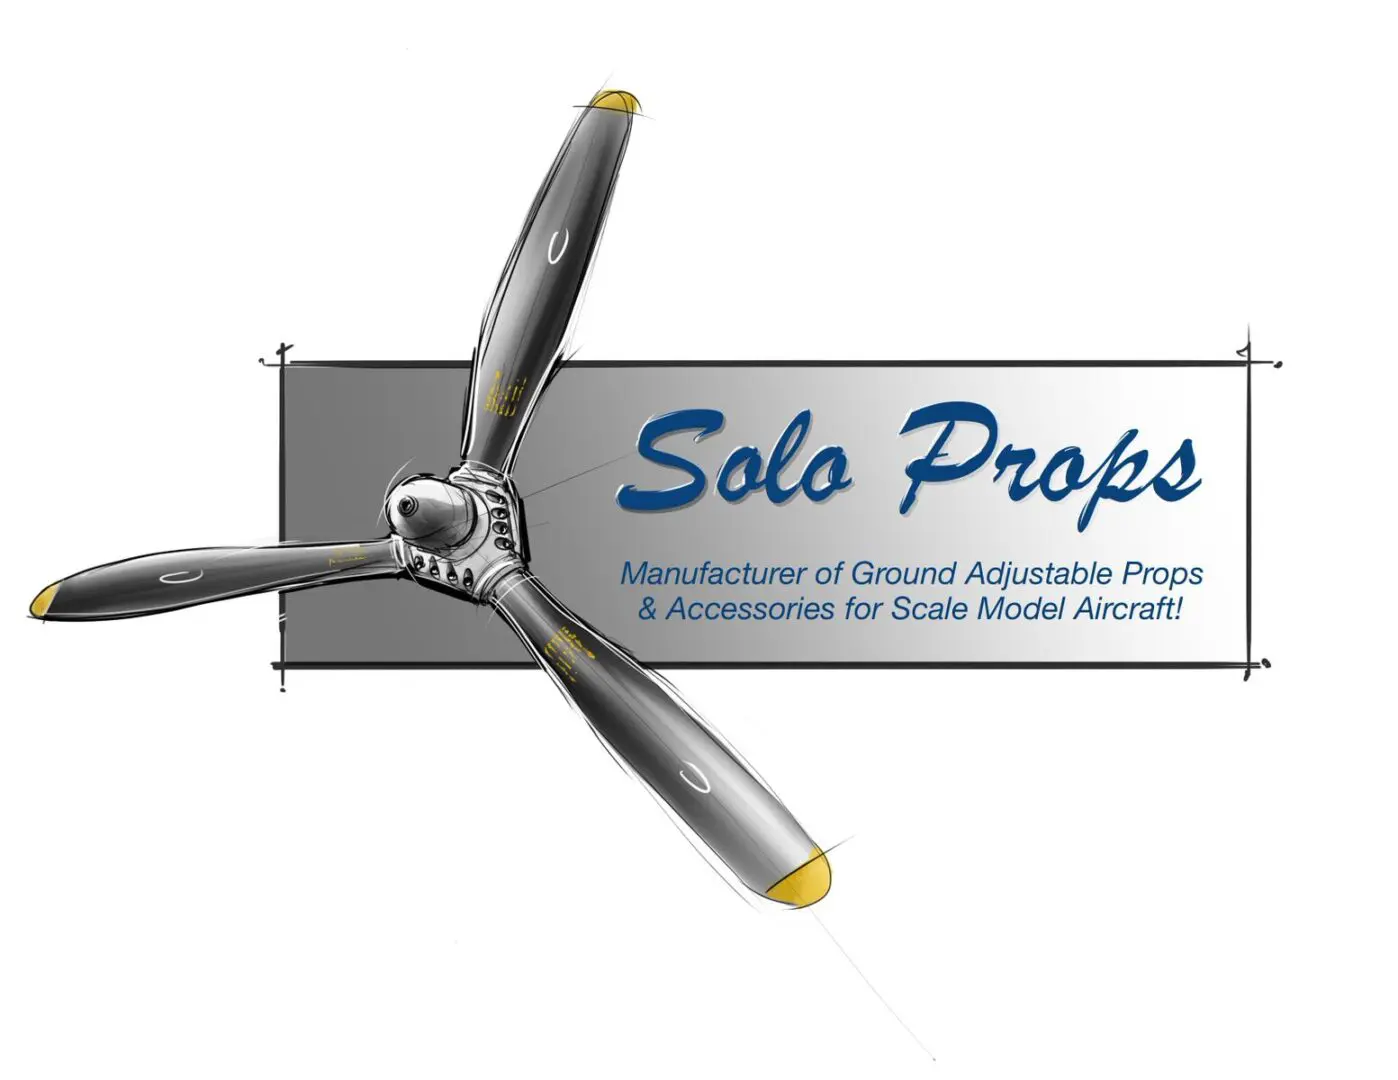 The Company Logo of Solo Props in grey background